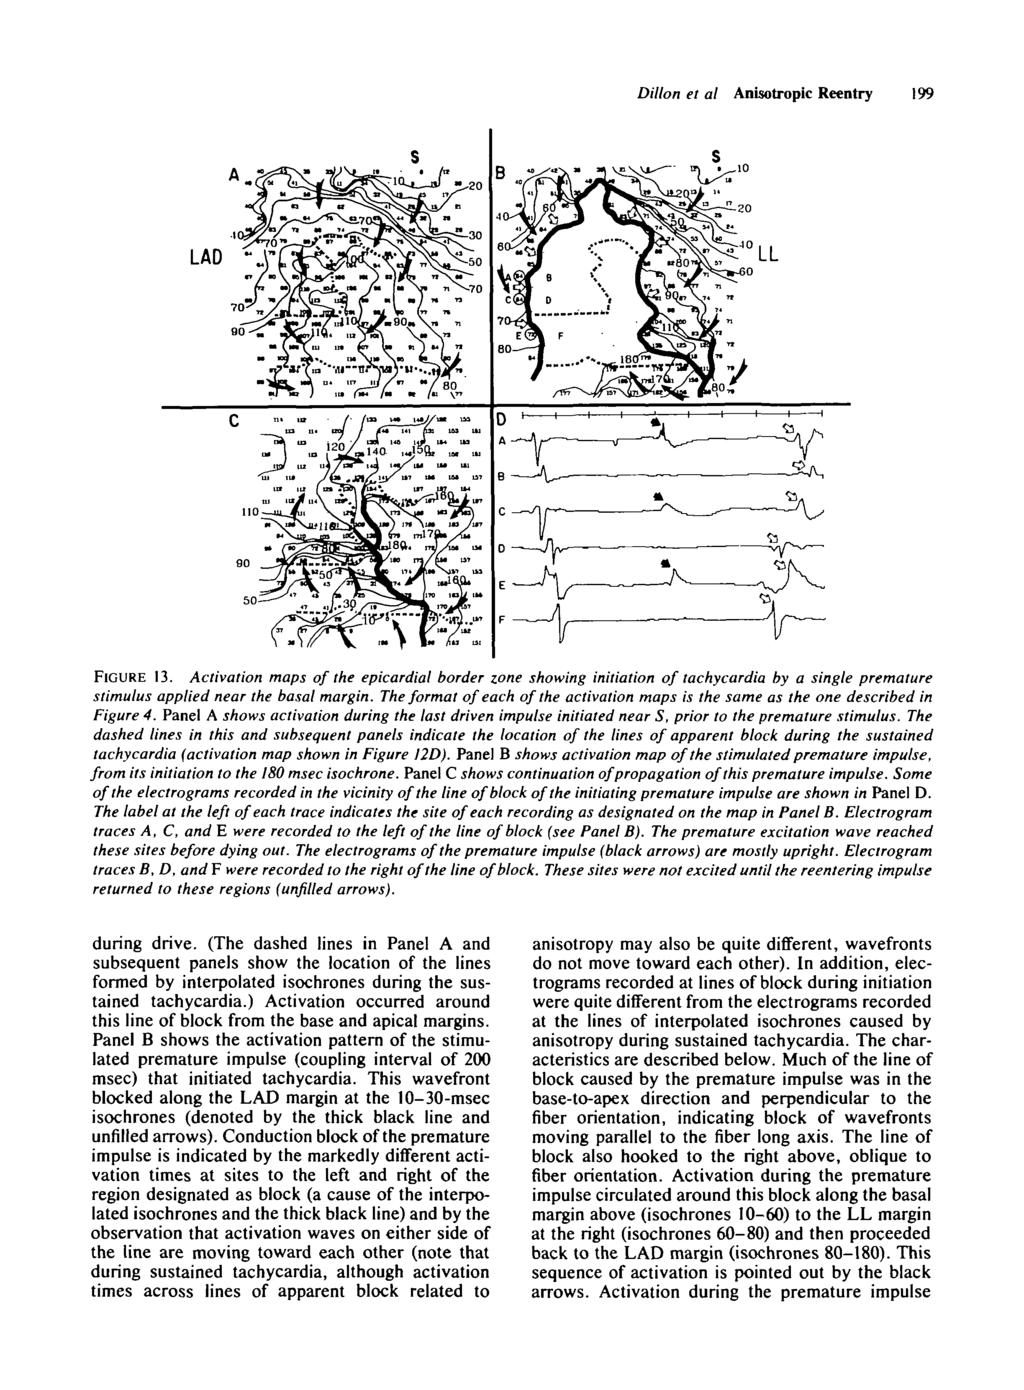 Dillon et al Anisotropic Reentry 199 20 FIGURE 13. Activation maps of the epicardial border zone showing initiation of tachycardia by a single premature stimulus applied near the basal margin.